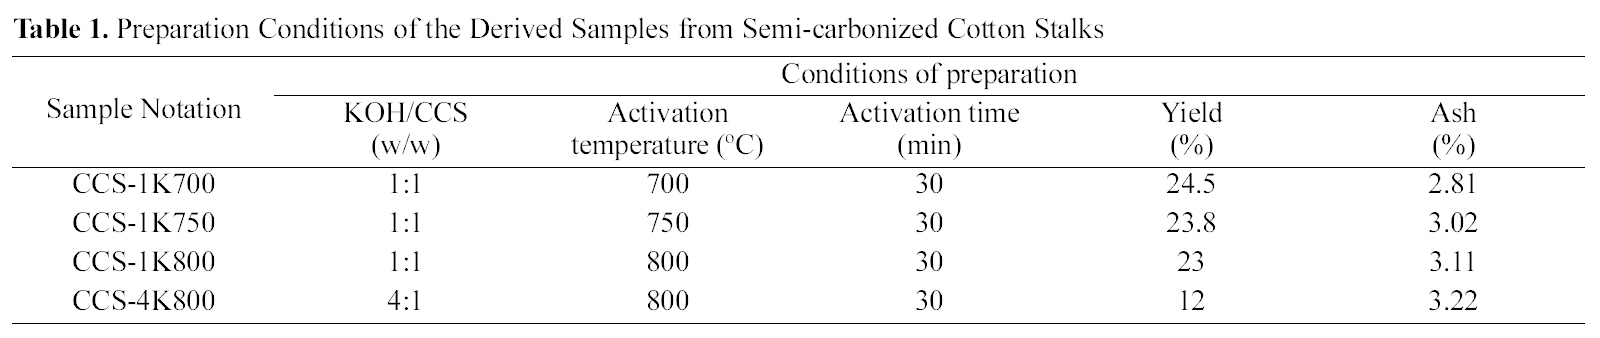 Preparation Conditions of the Derived Samples from Semi-carbonized Cotton Stalks